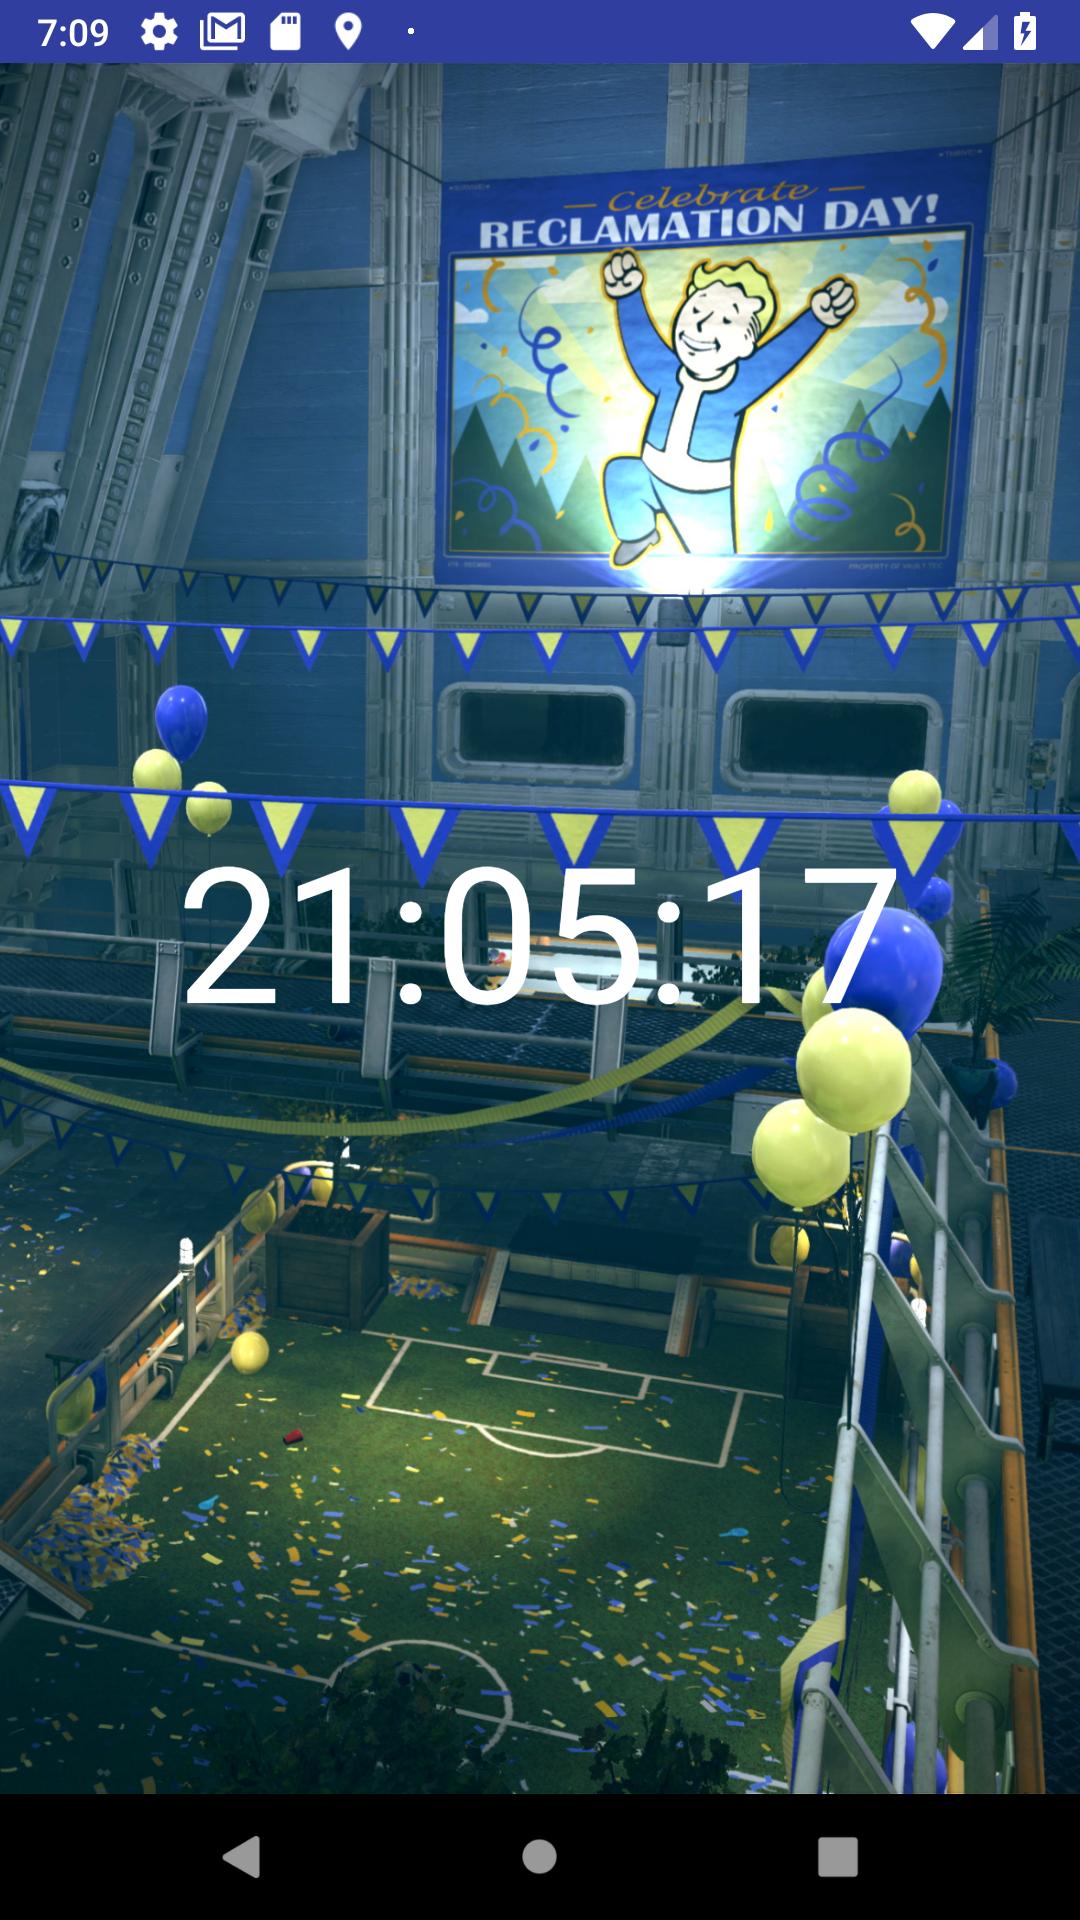 Countdown To Fallout 76 Live Wallpaper For Android Apk Download